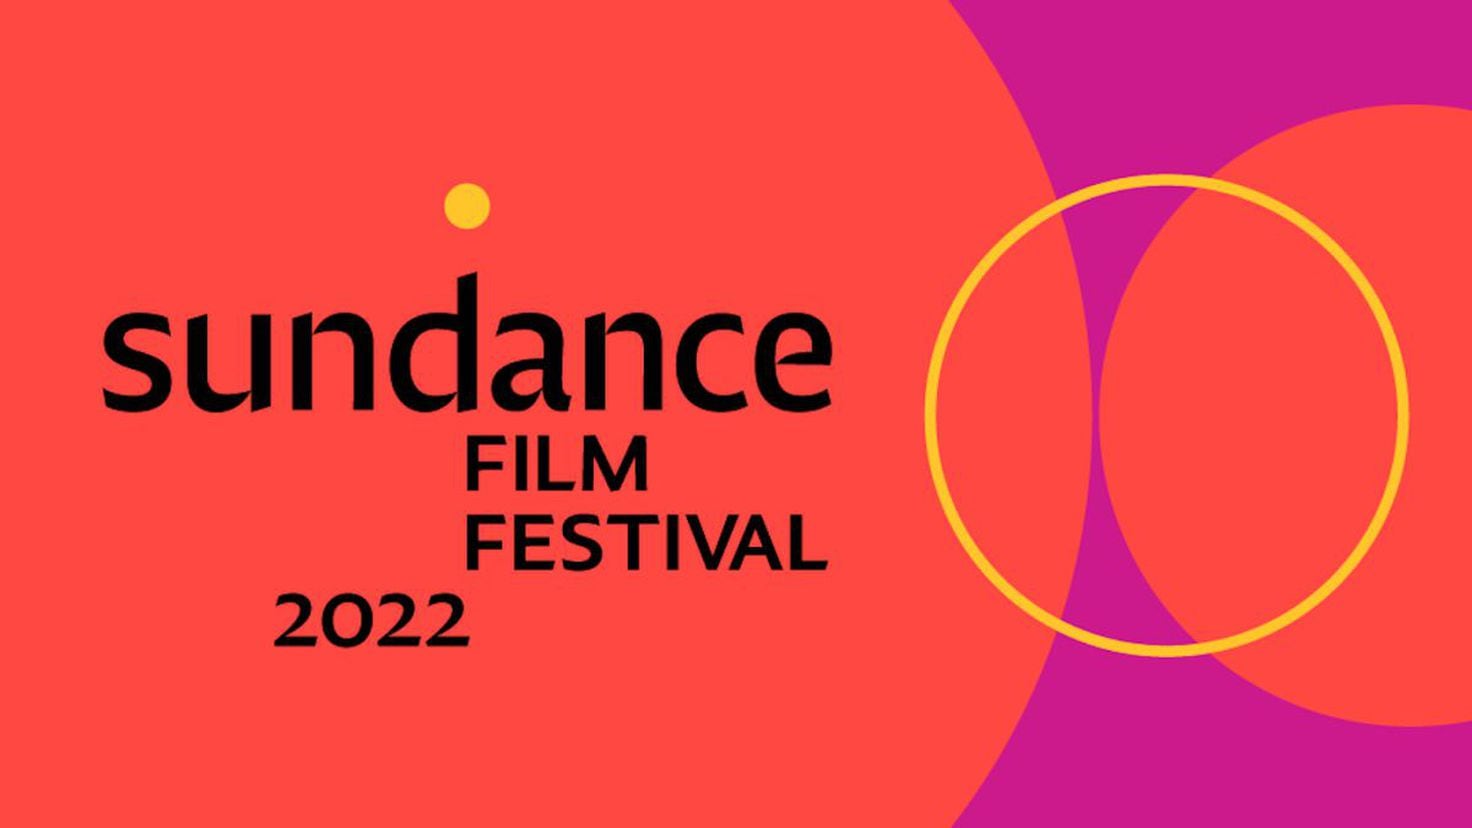 Sundance Film Festival 2022 how to get tickets cost, when and where